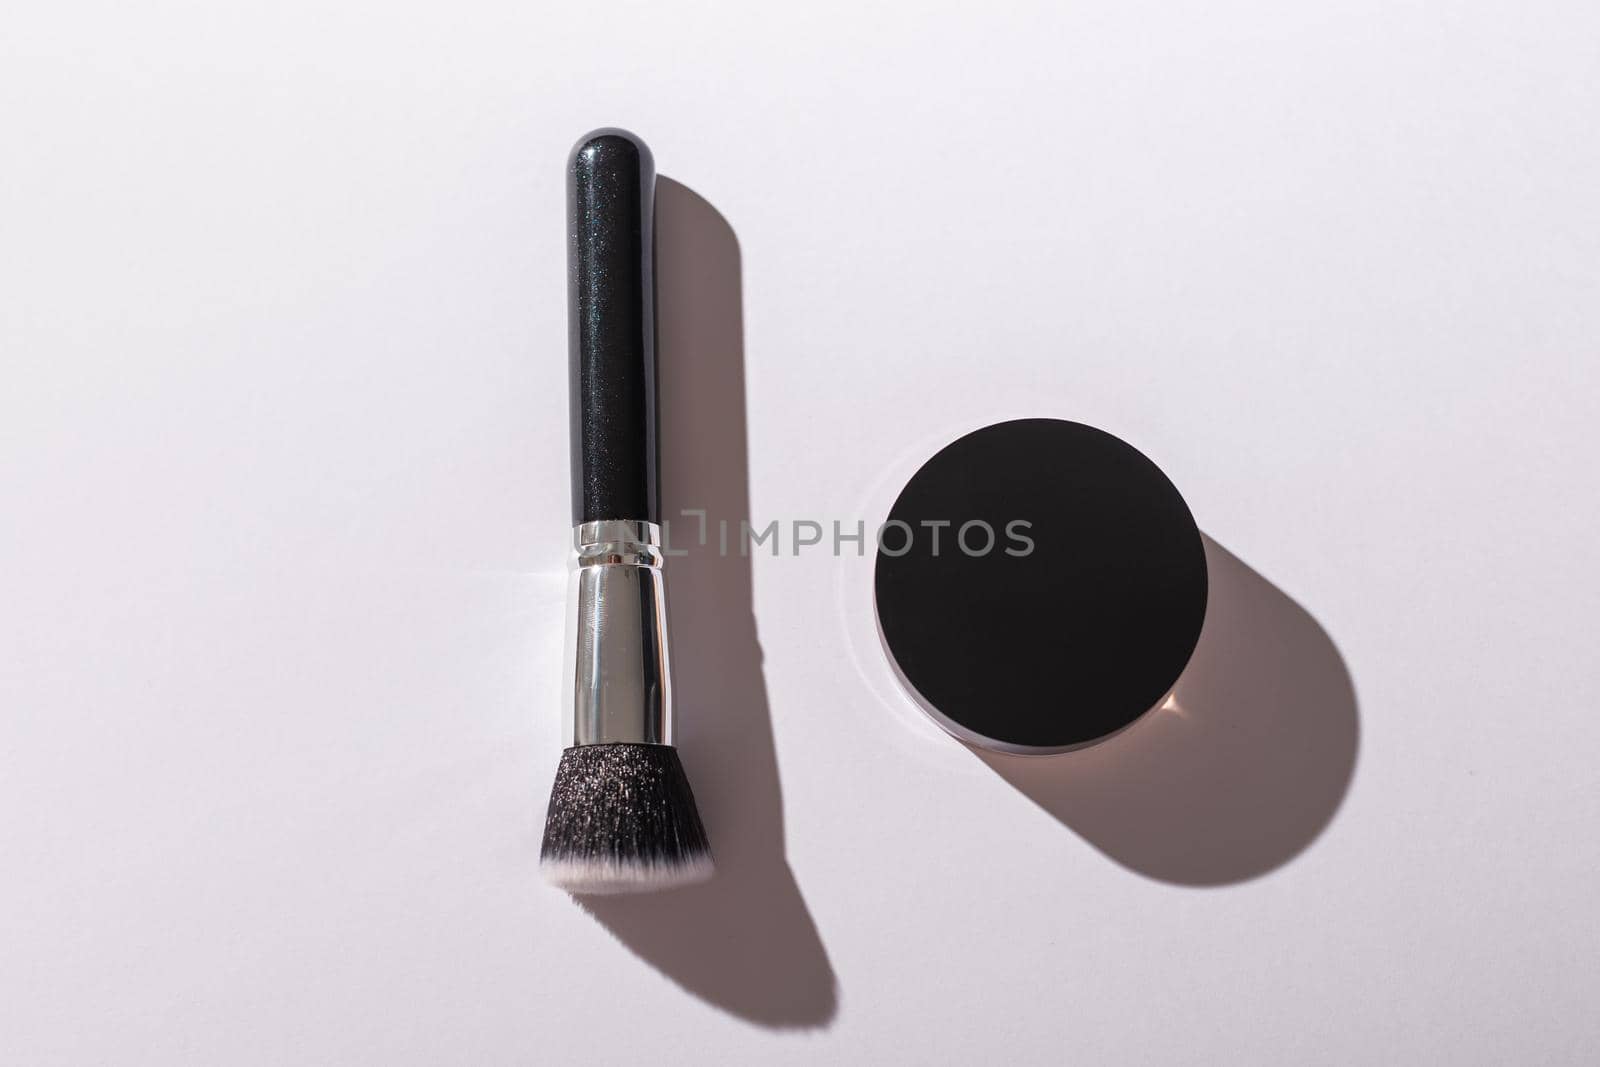 Mineral face powder and brush. Eco-friendly and organic beauty products by Satura86